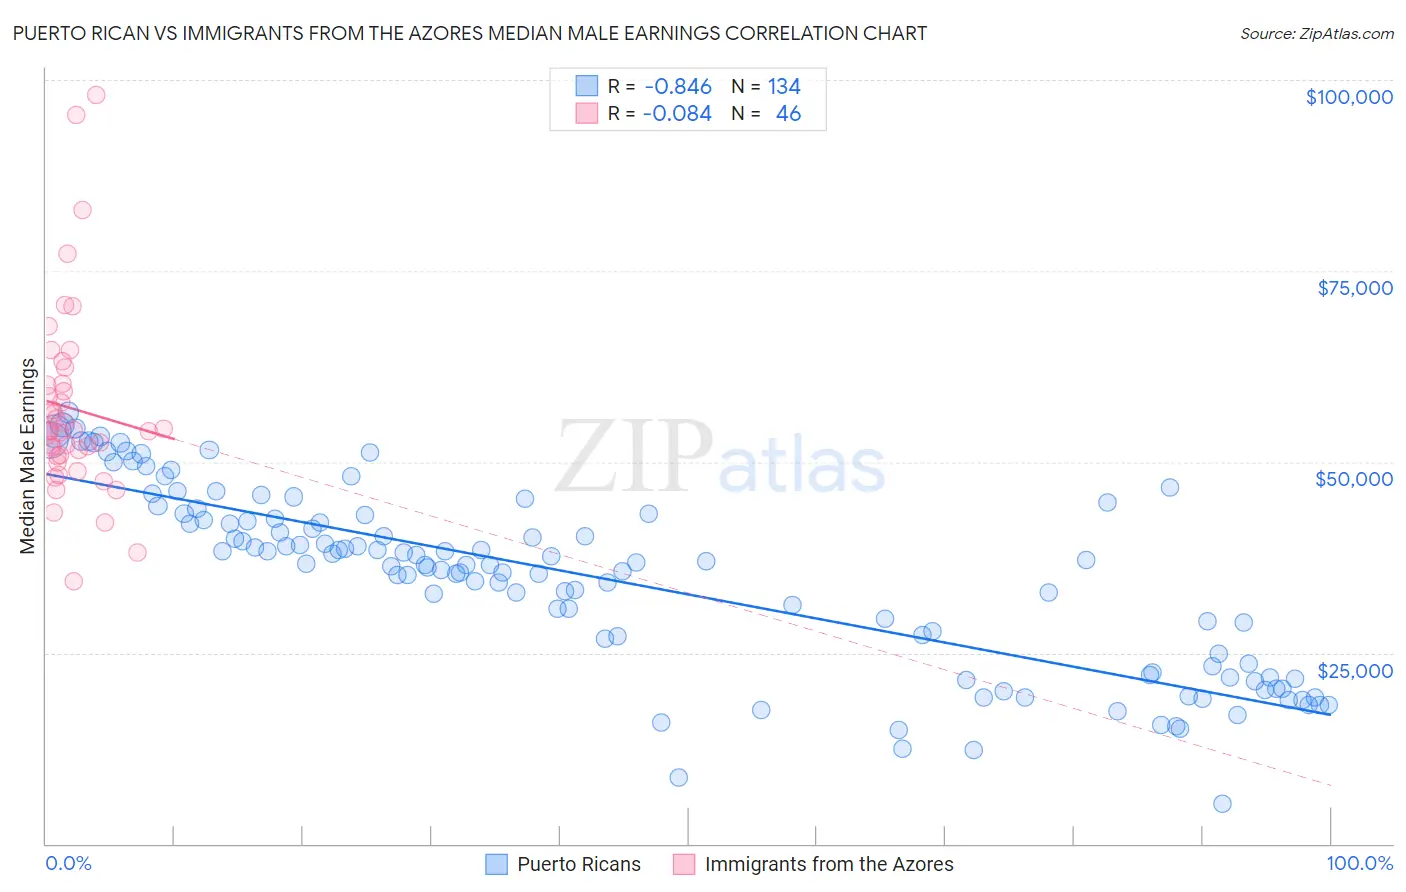 Puerto Rican vs Immigrants from the Azores Median Male Earnings